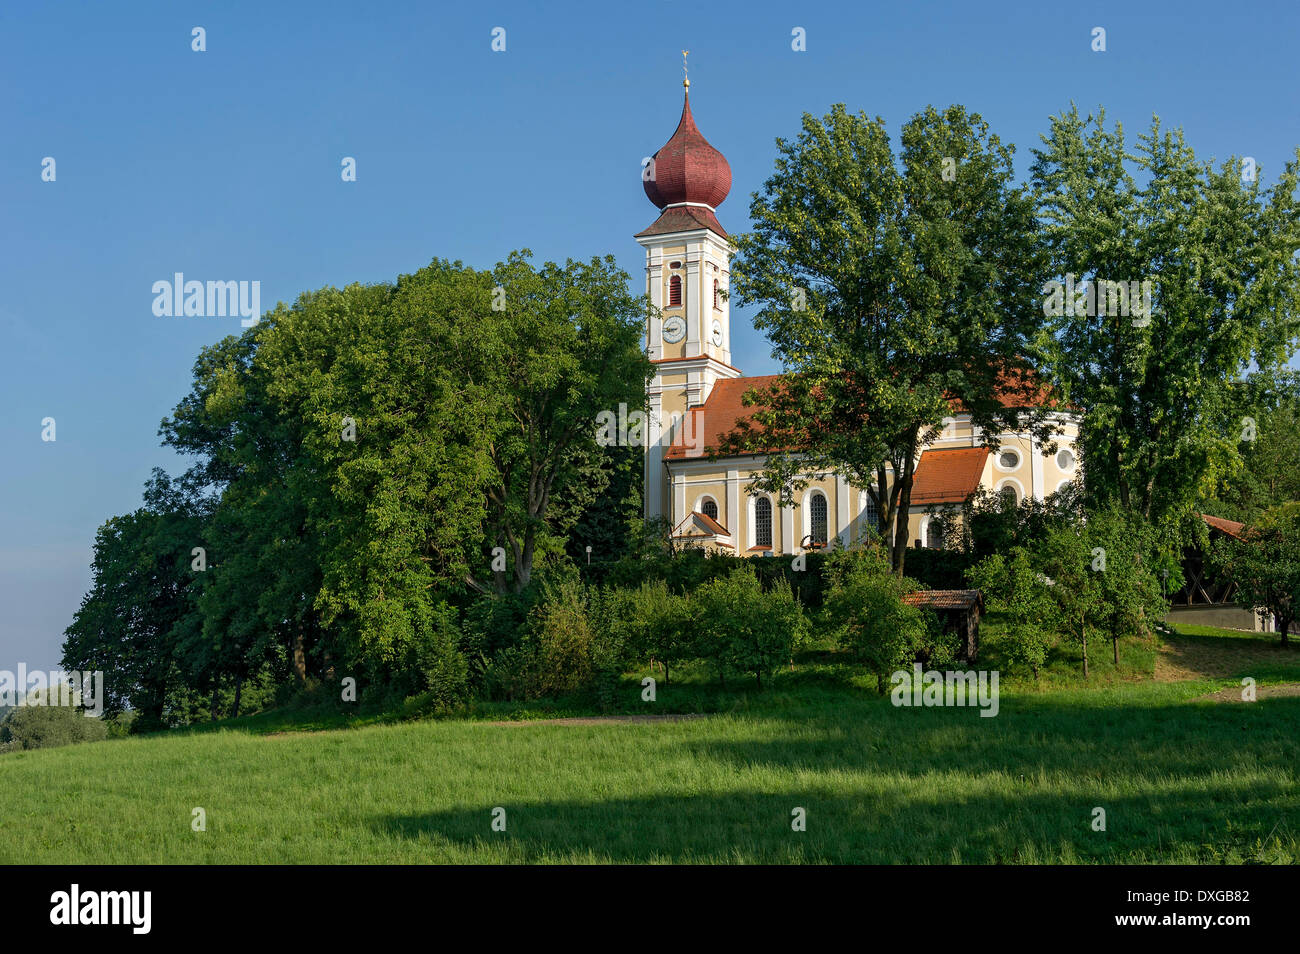 Subsidiary Church of St. Peter and Paul with onion dome, Kirchberg, Upper Bavaria, Bavaria, Germany Stock Photo